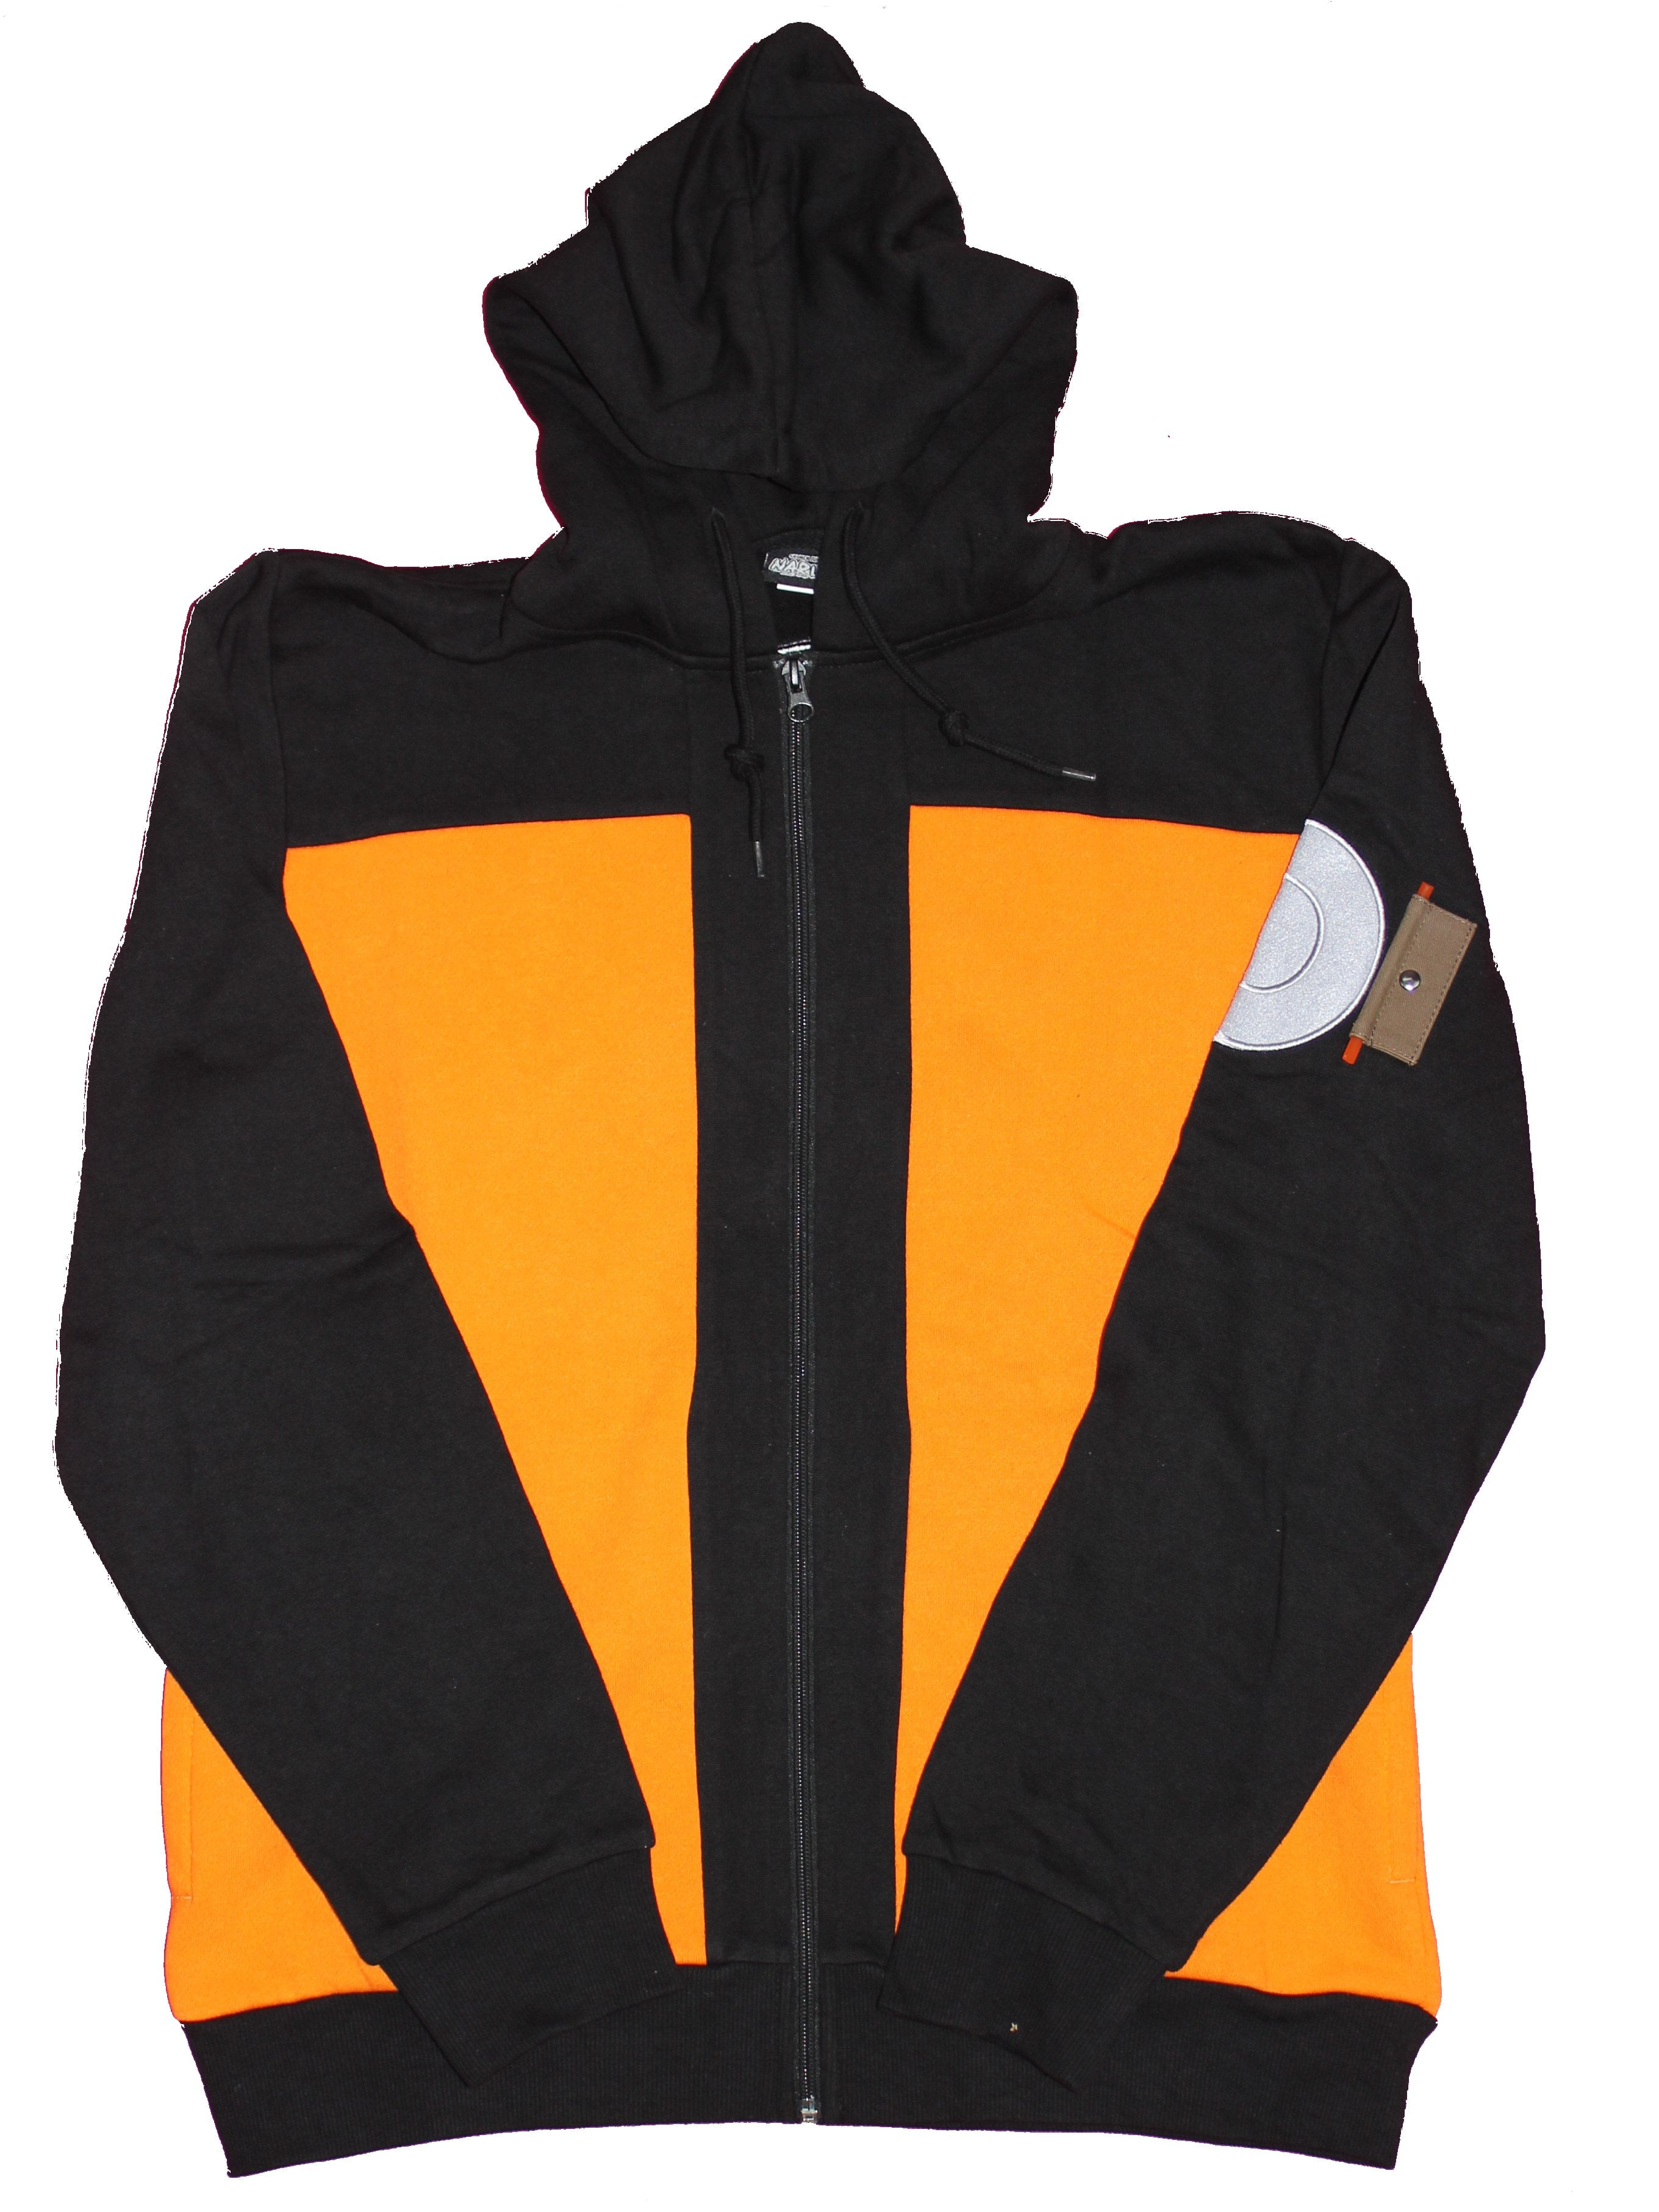 This question has probably been asked a lot, but why does Naruto in the  Boruto series have an orange and black striped jacket, unlike the original  black and orange striped jacket shown